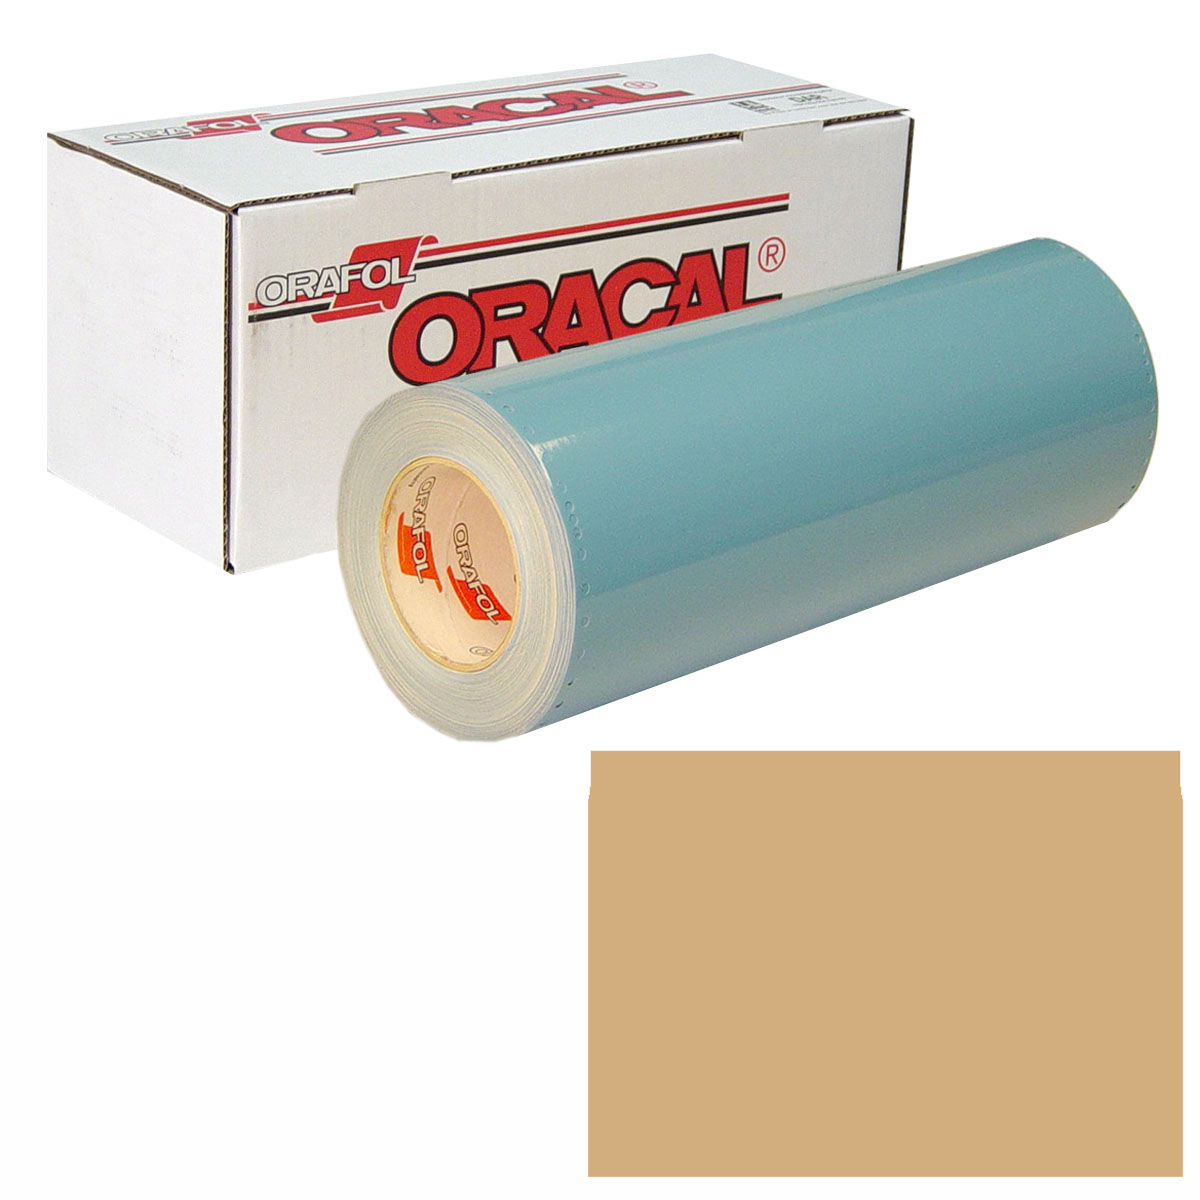 ORACAL 751 30in X 10yd 081 Light Brown